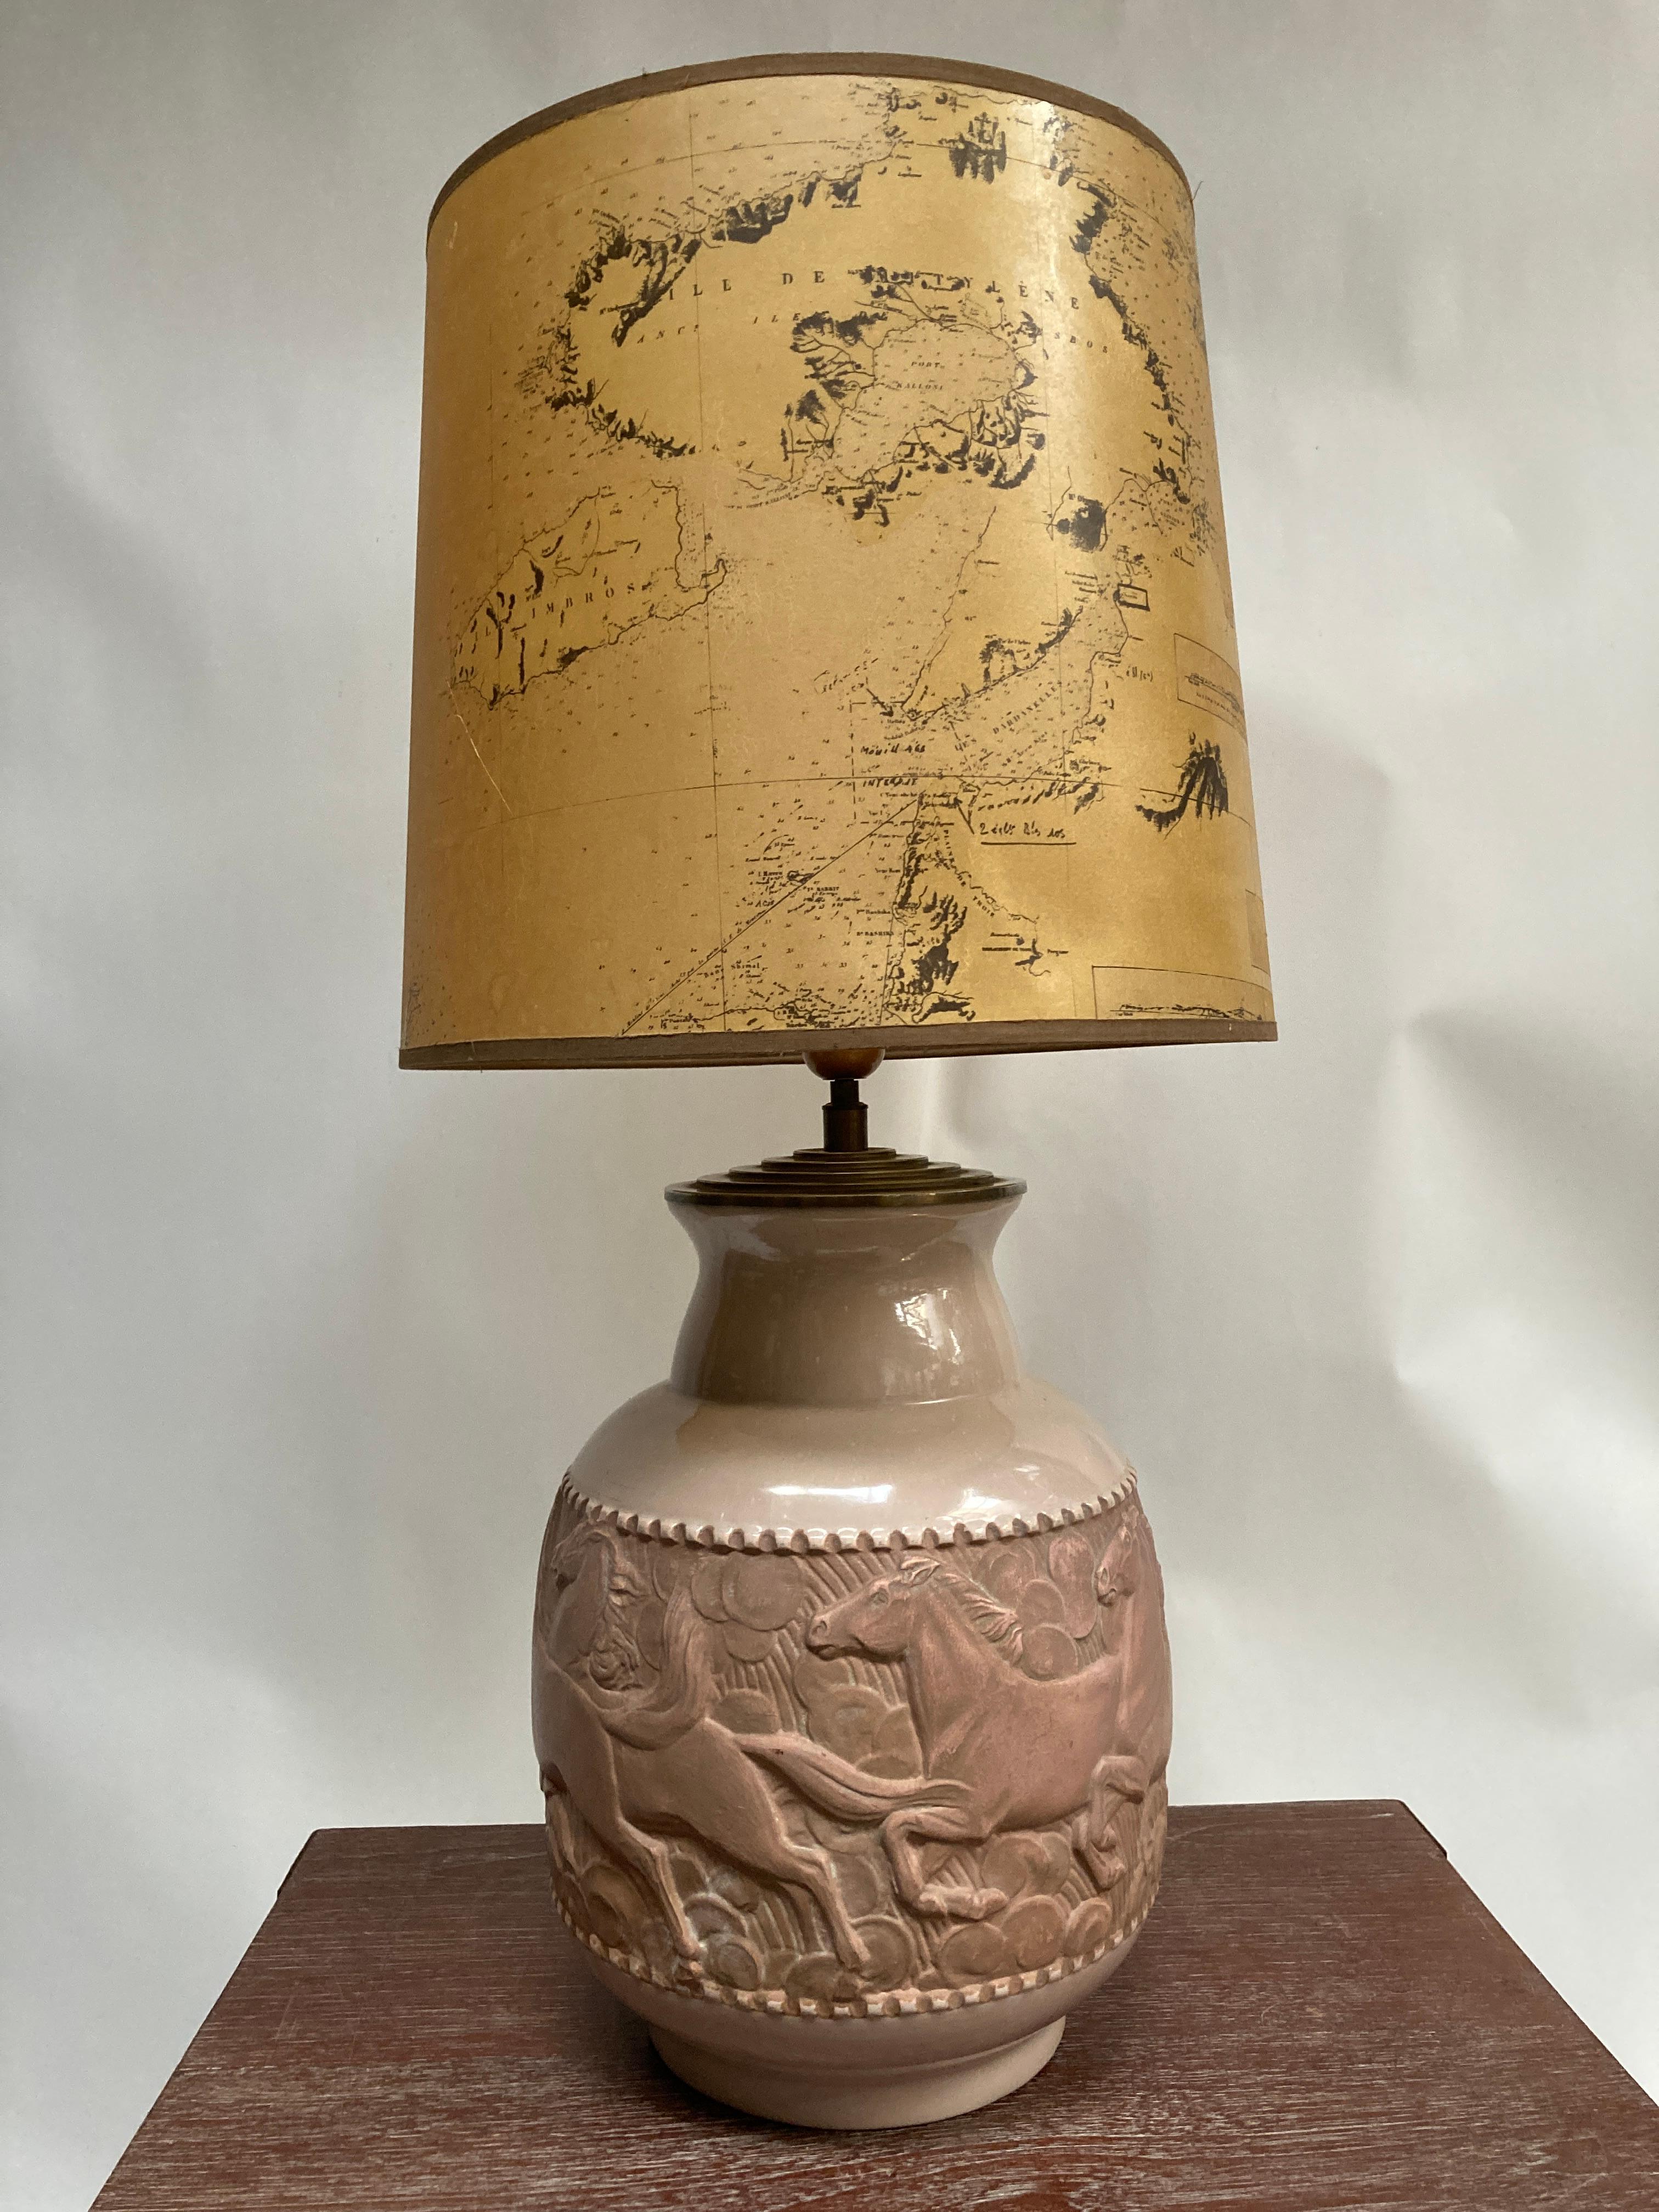 Very nice 1930's Studio pottery ceramic lamp showing a frieze of horses
Great condition
No shade included , Dimensions given without shade